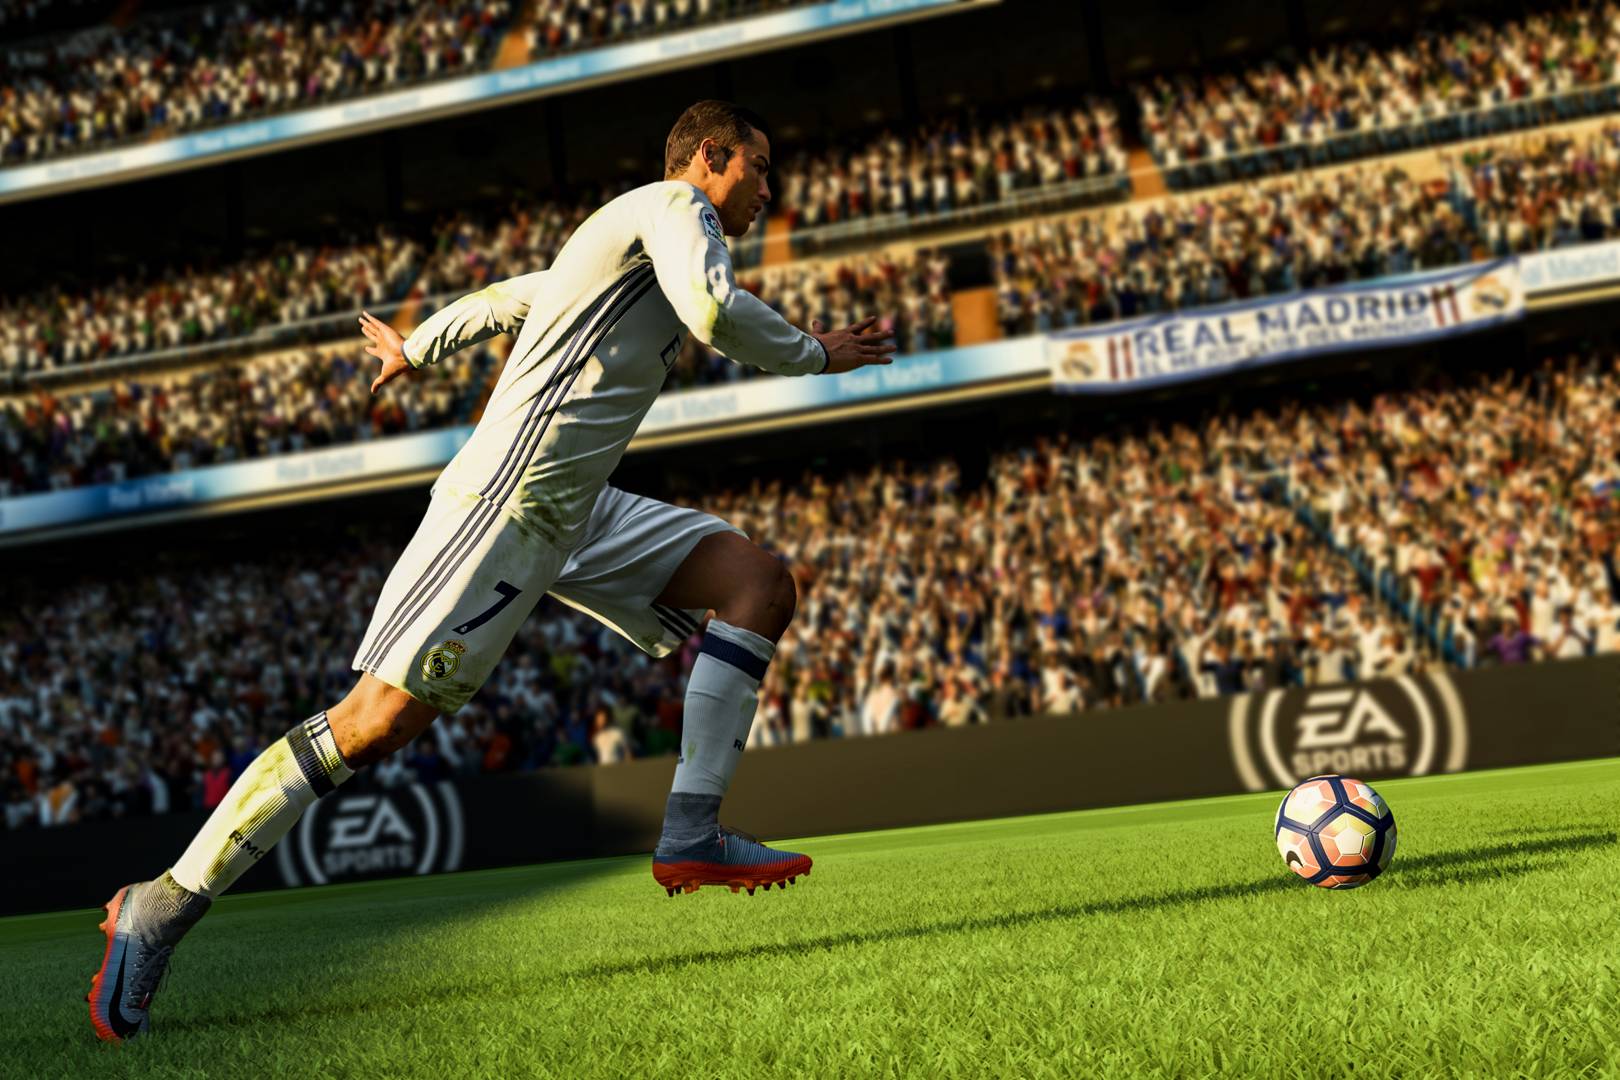 FIFA 18 on Nintendo Switch review is the biggest justification for the